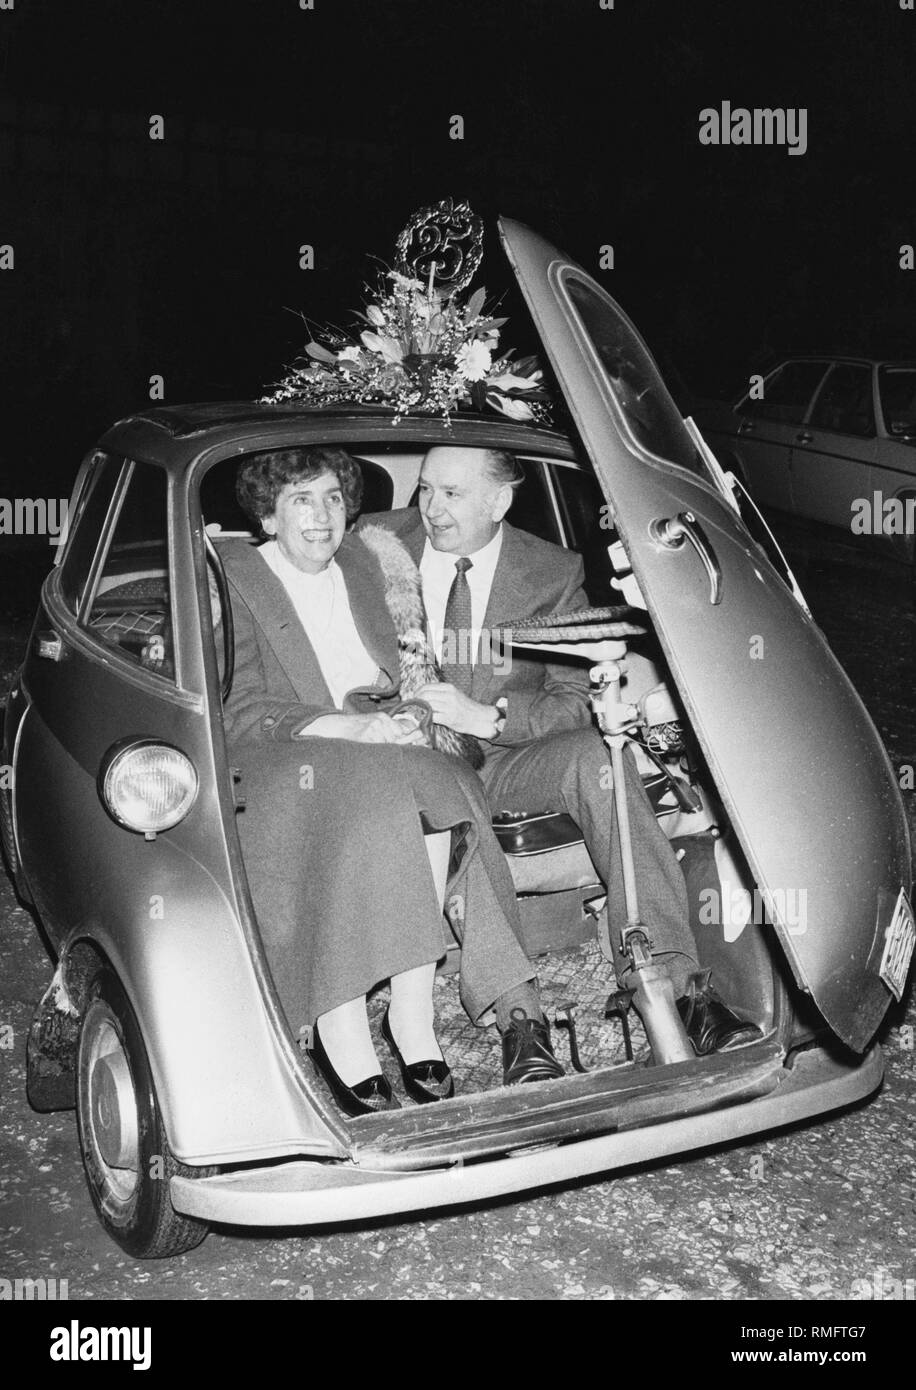 The couple Ingrid and Erich Schaefer in a BMW Isetta. The car was a gift from the staff of Erich Schaefer's company of electrical installers on the occasion of its the 25th anniversary. Stock Photo